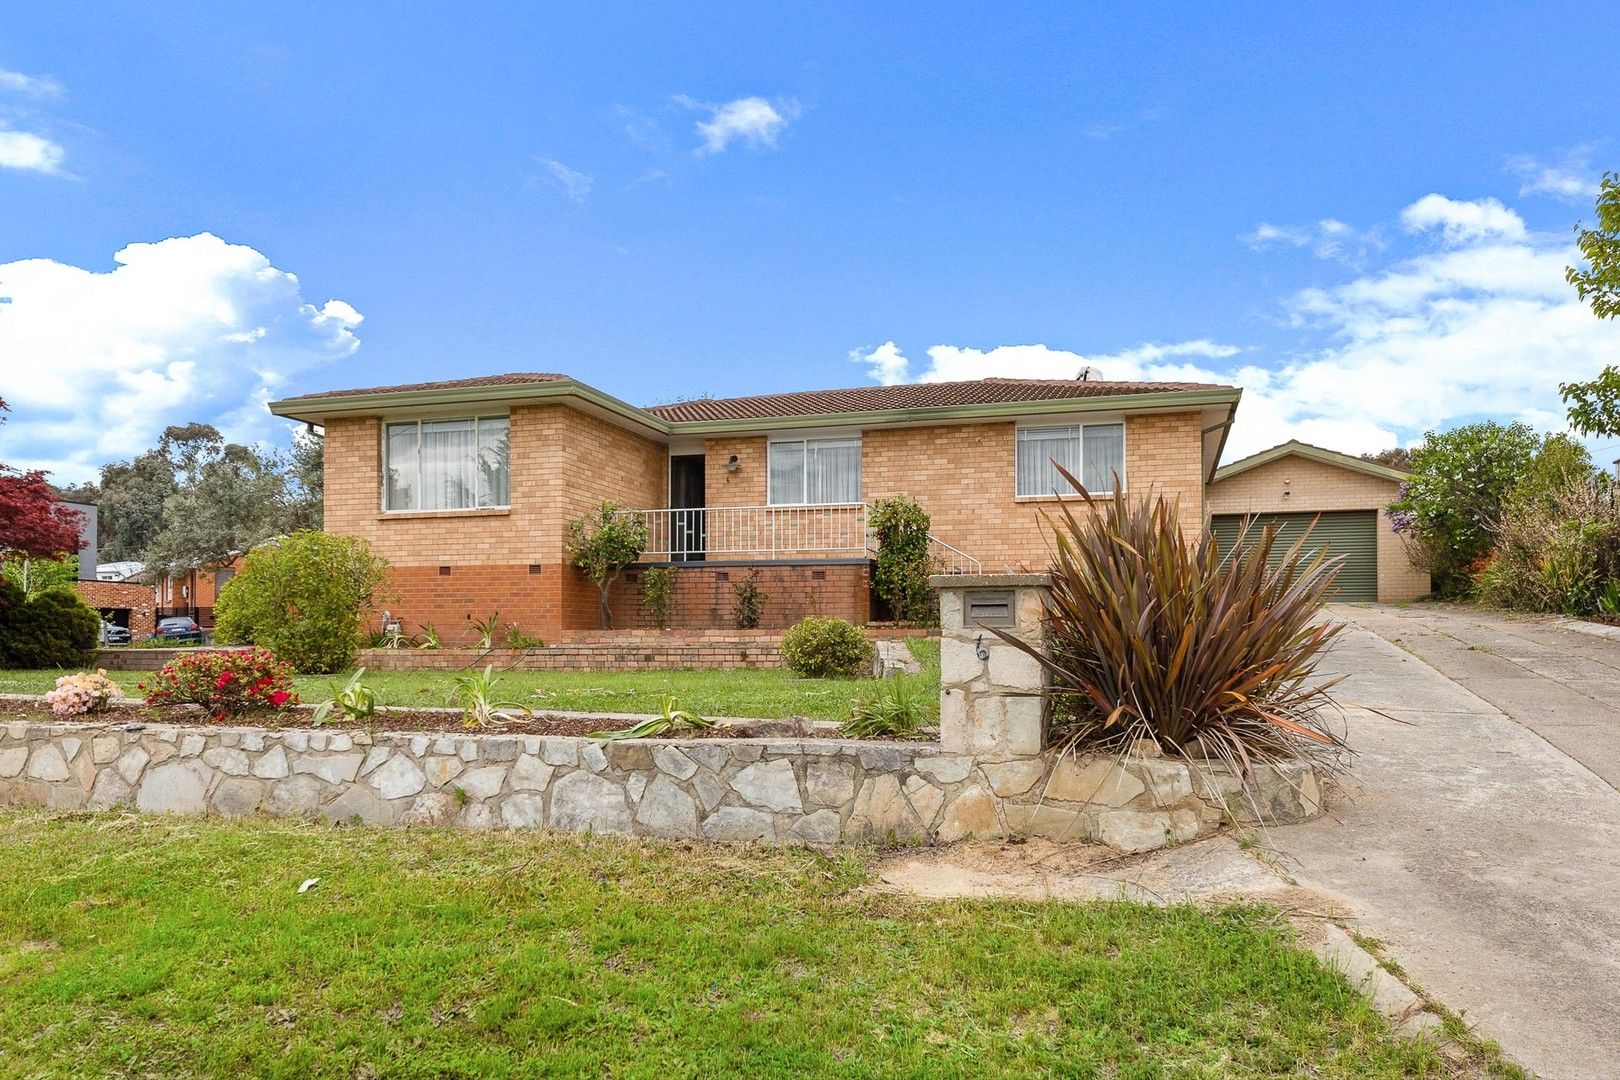 3 bedrooms House in 6 Charteris Crescent CHIFLEY ACT, 2606